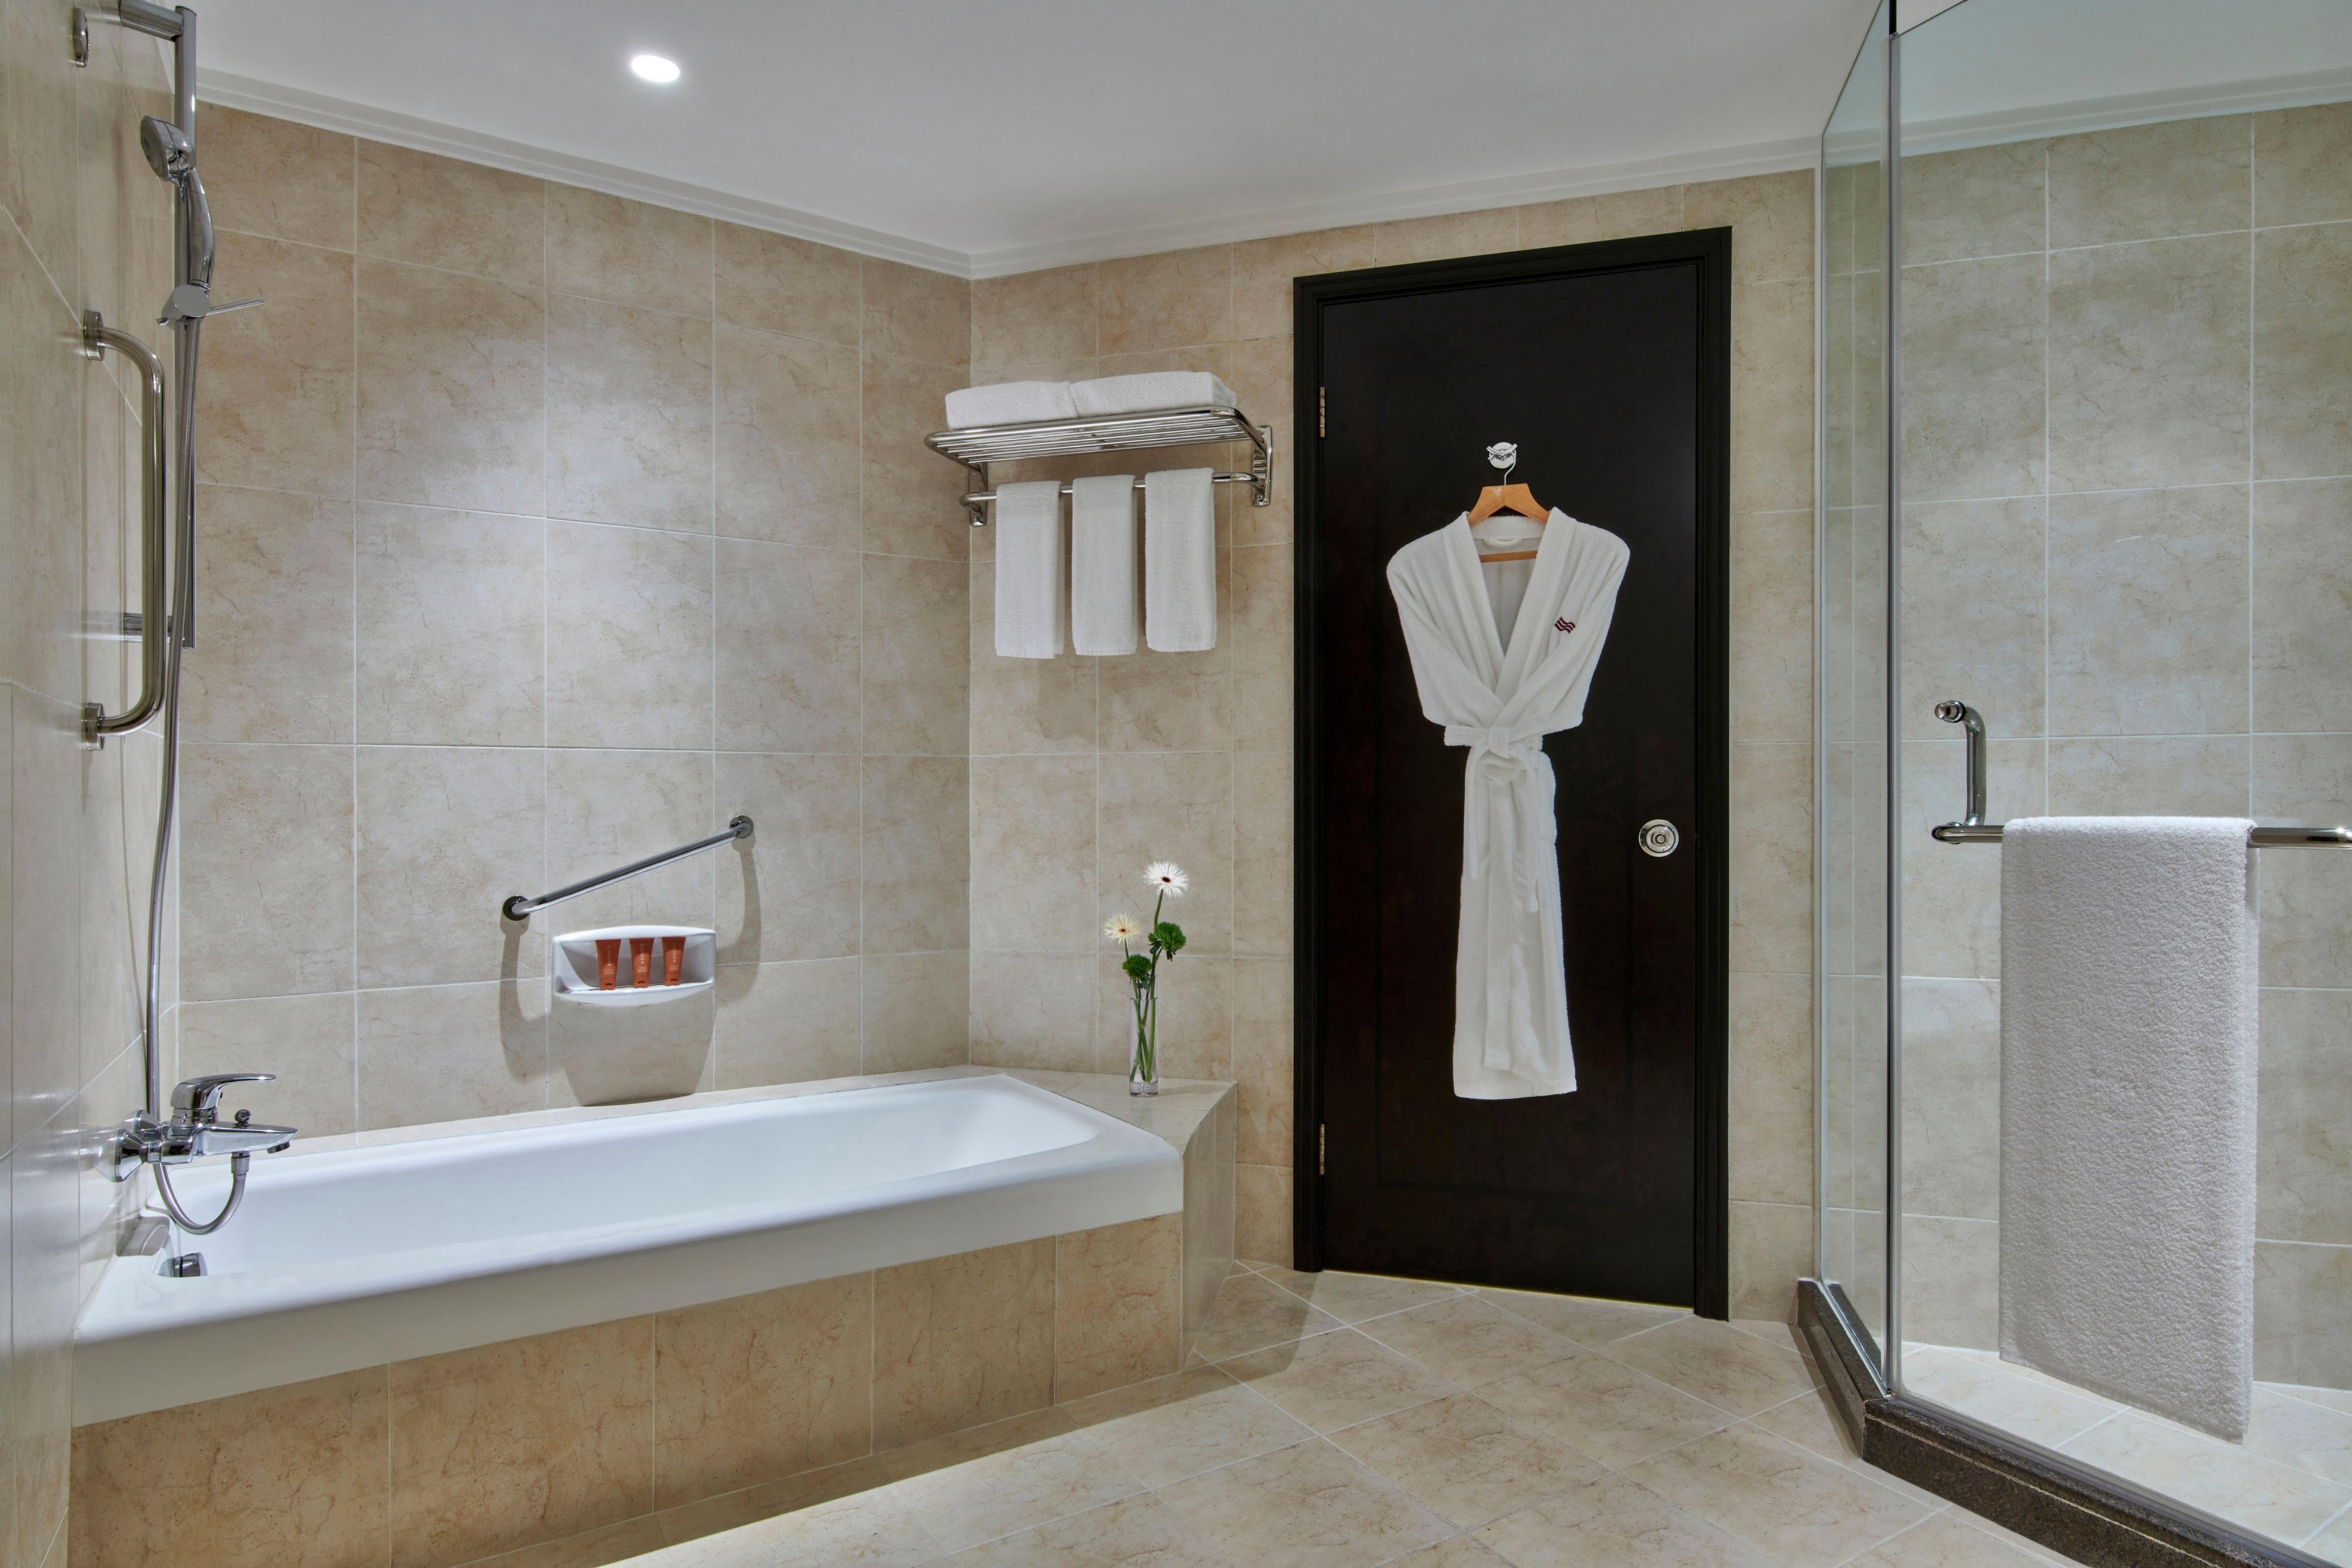 Separate Bath and Walk-in Shower